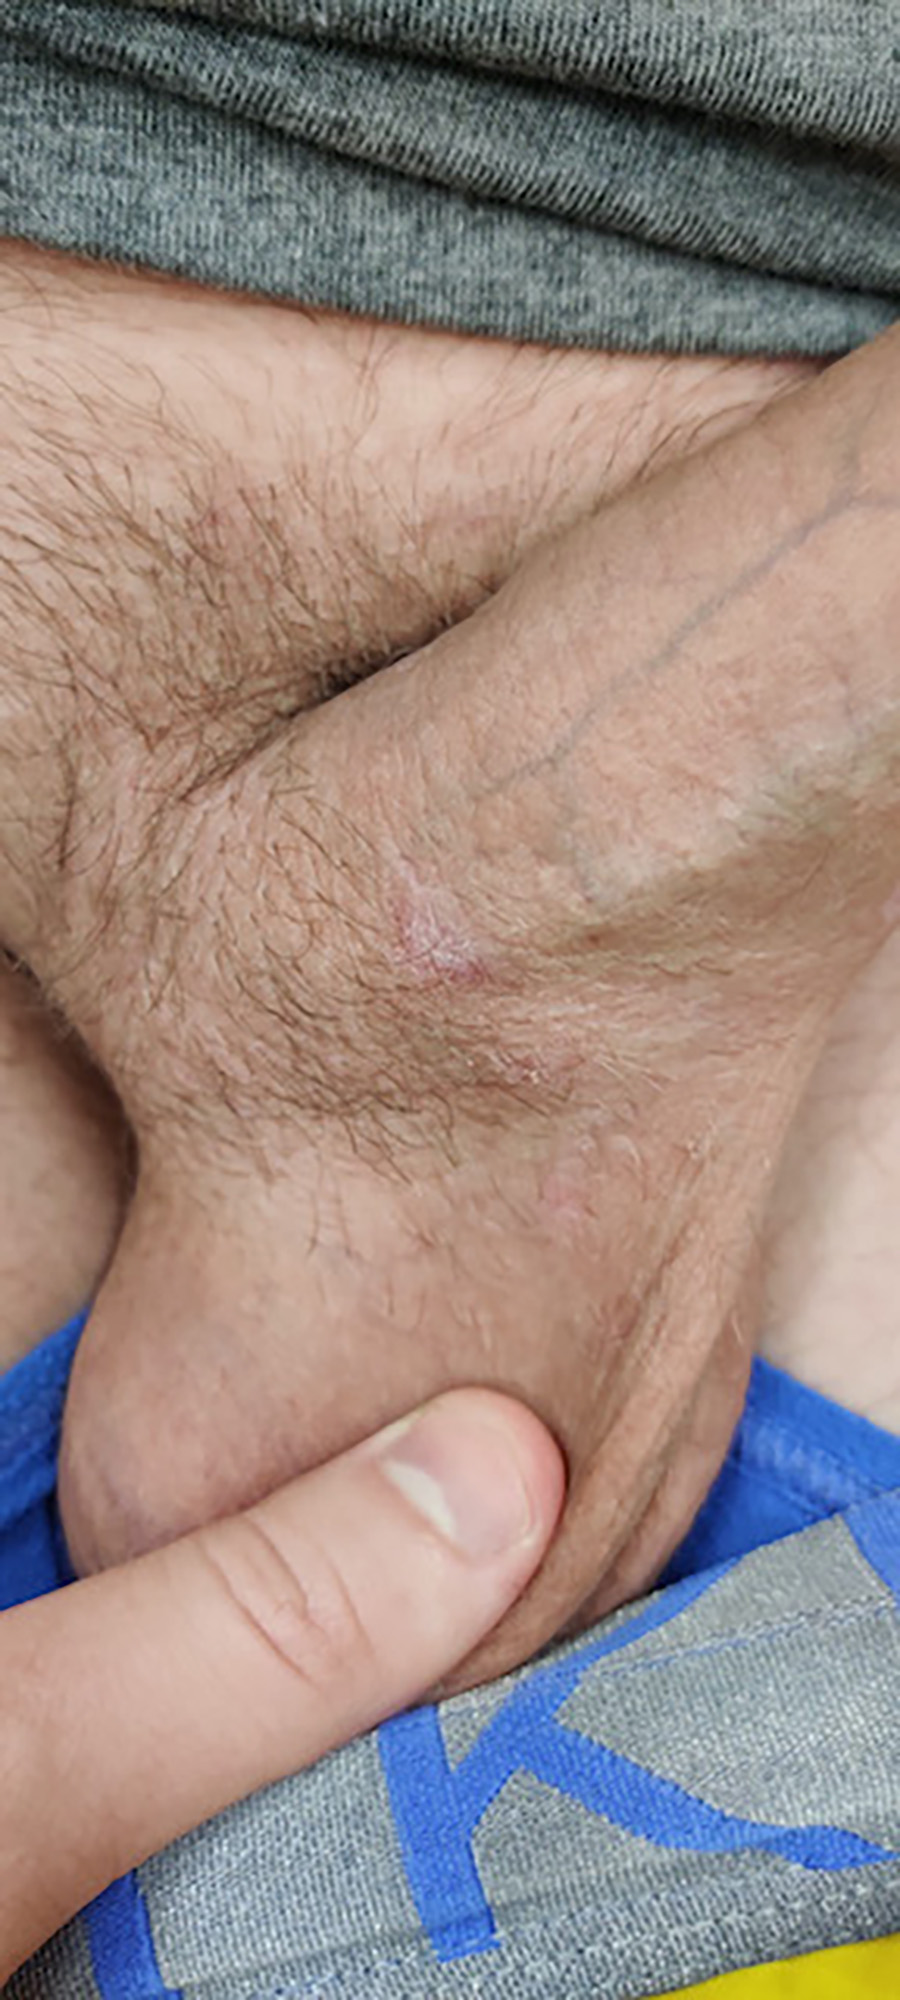 Healed secondary penile lesion right side